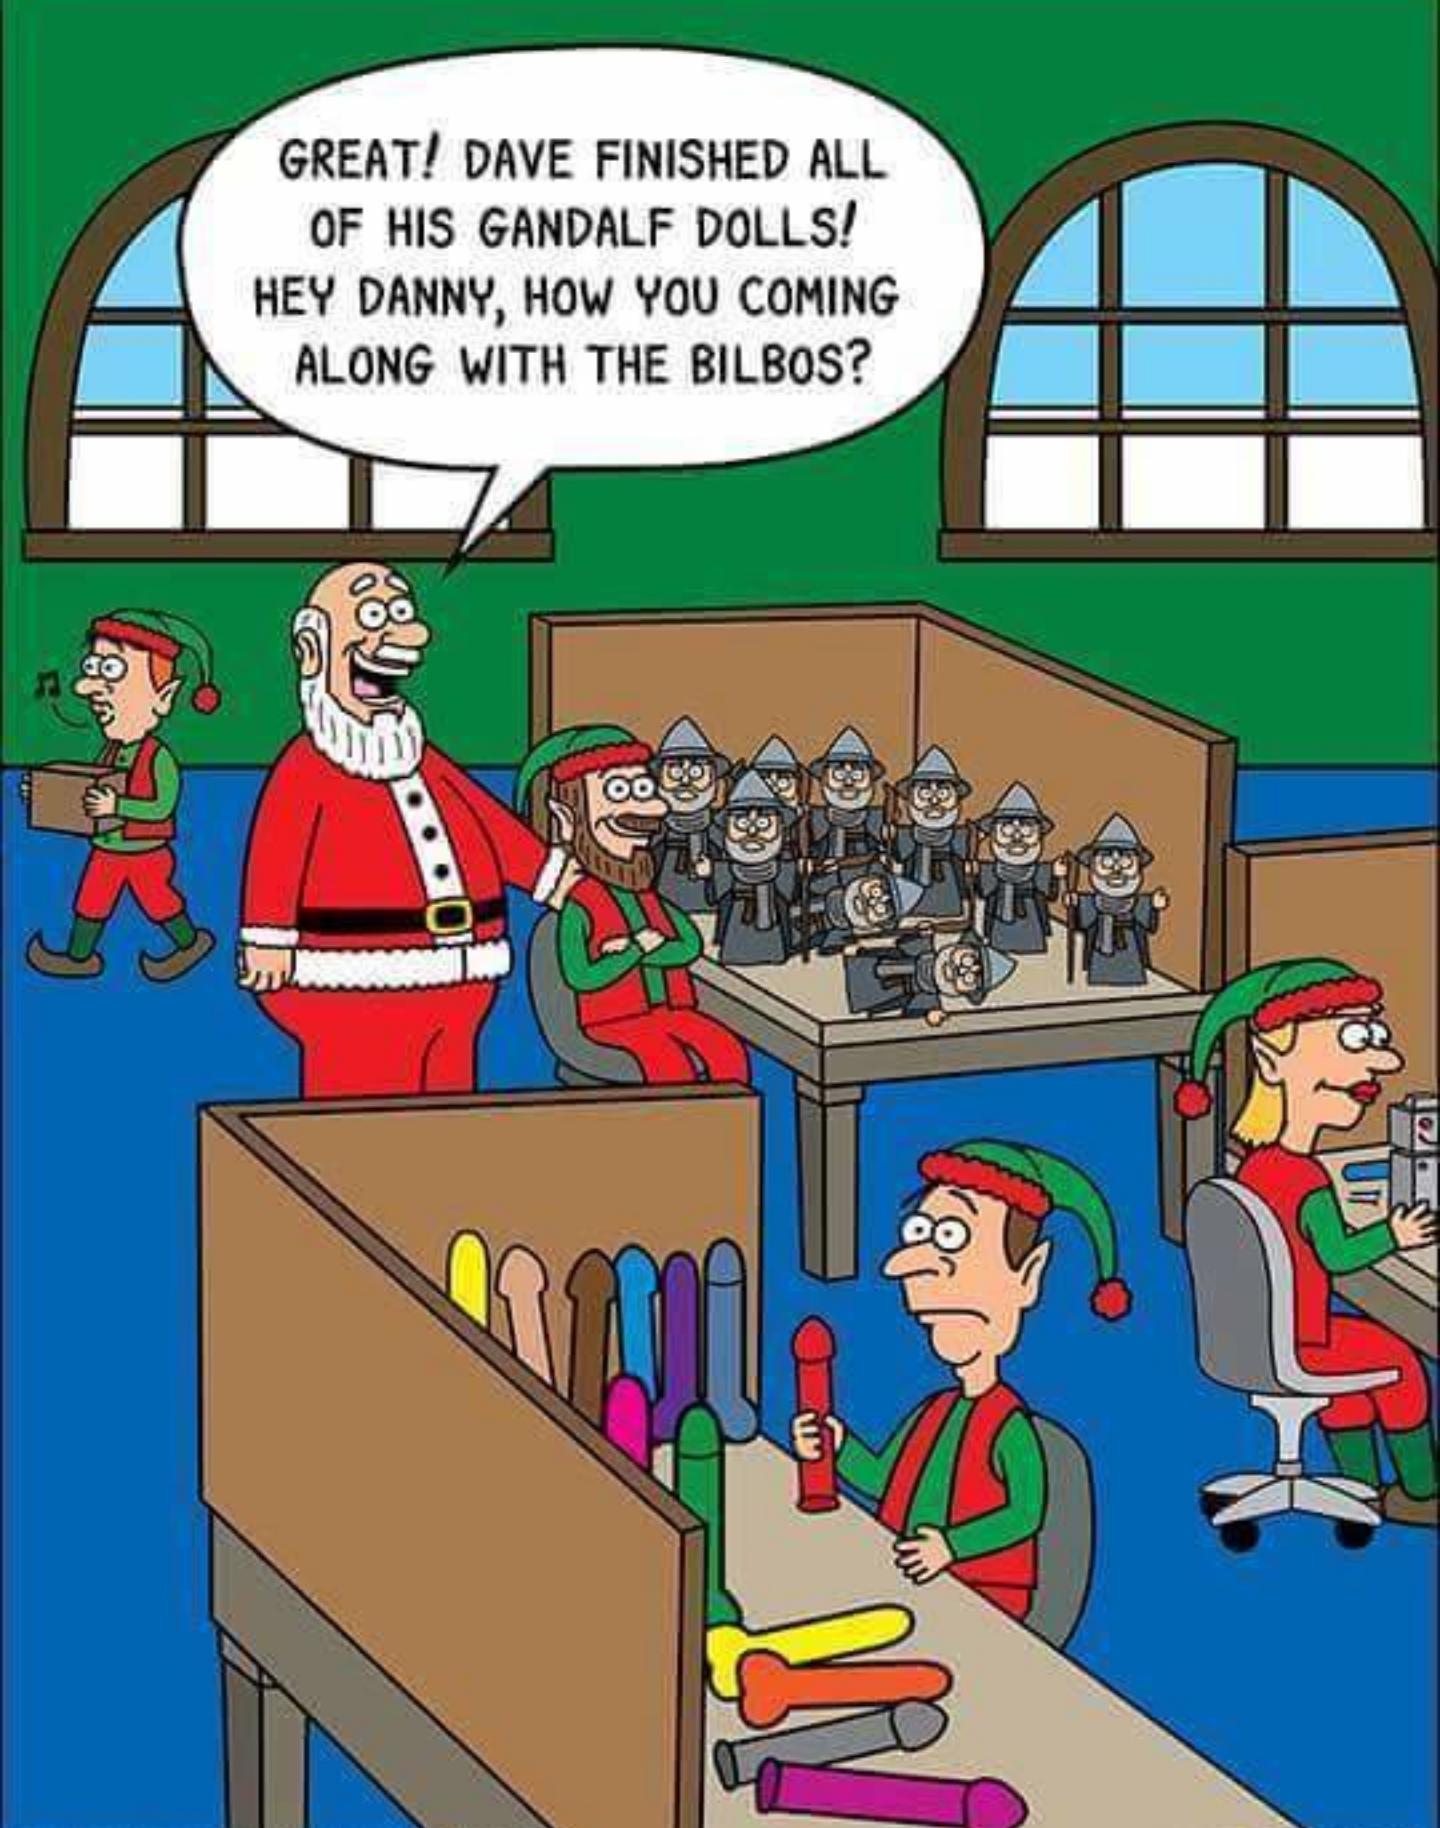 Meantime in Santa’s toy factory